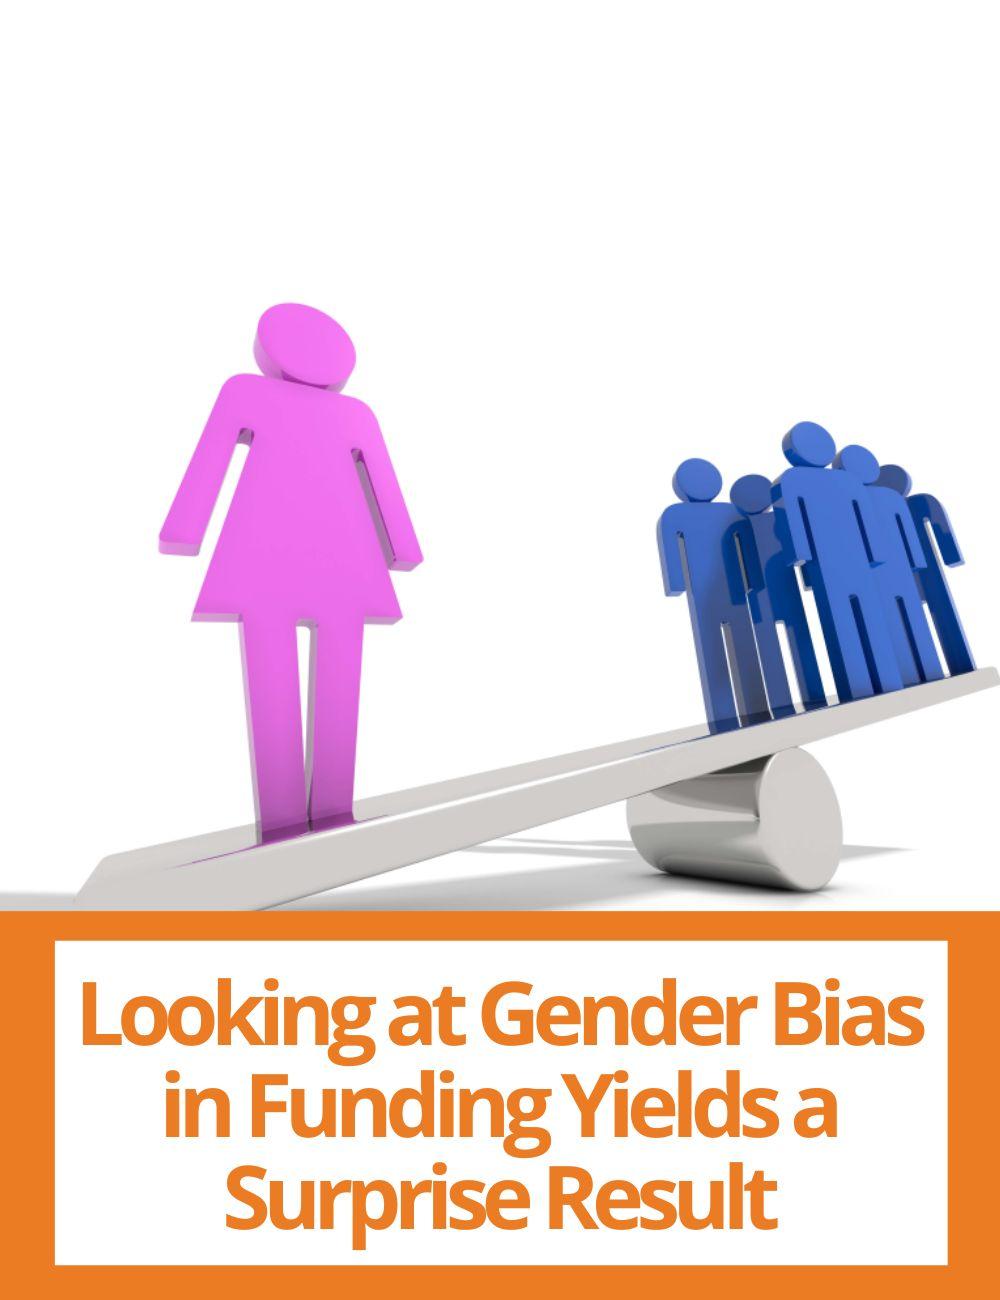 Link to related stories. Image: a weigher and figures of people. Story headline: Looking at Gender Bias in Funding Yields a Surprise Result 